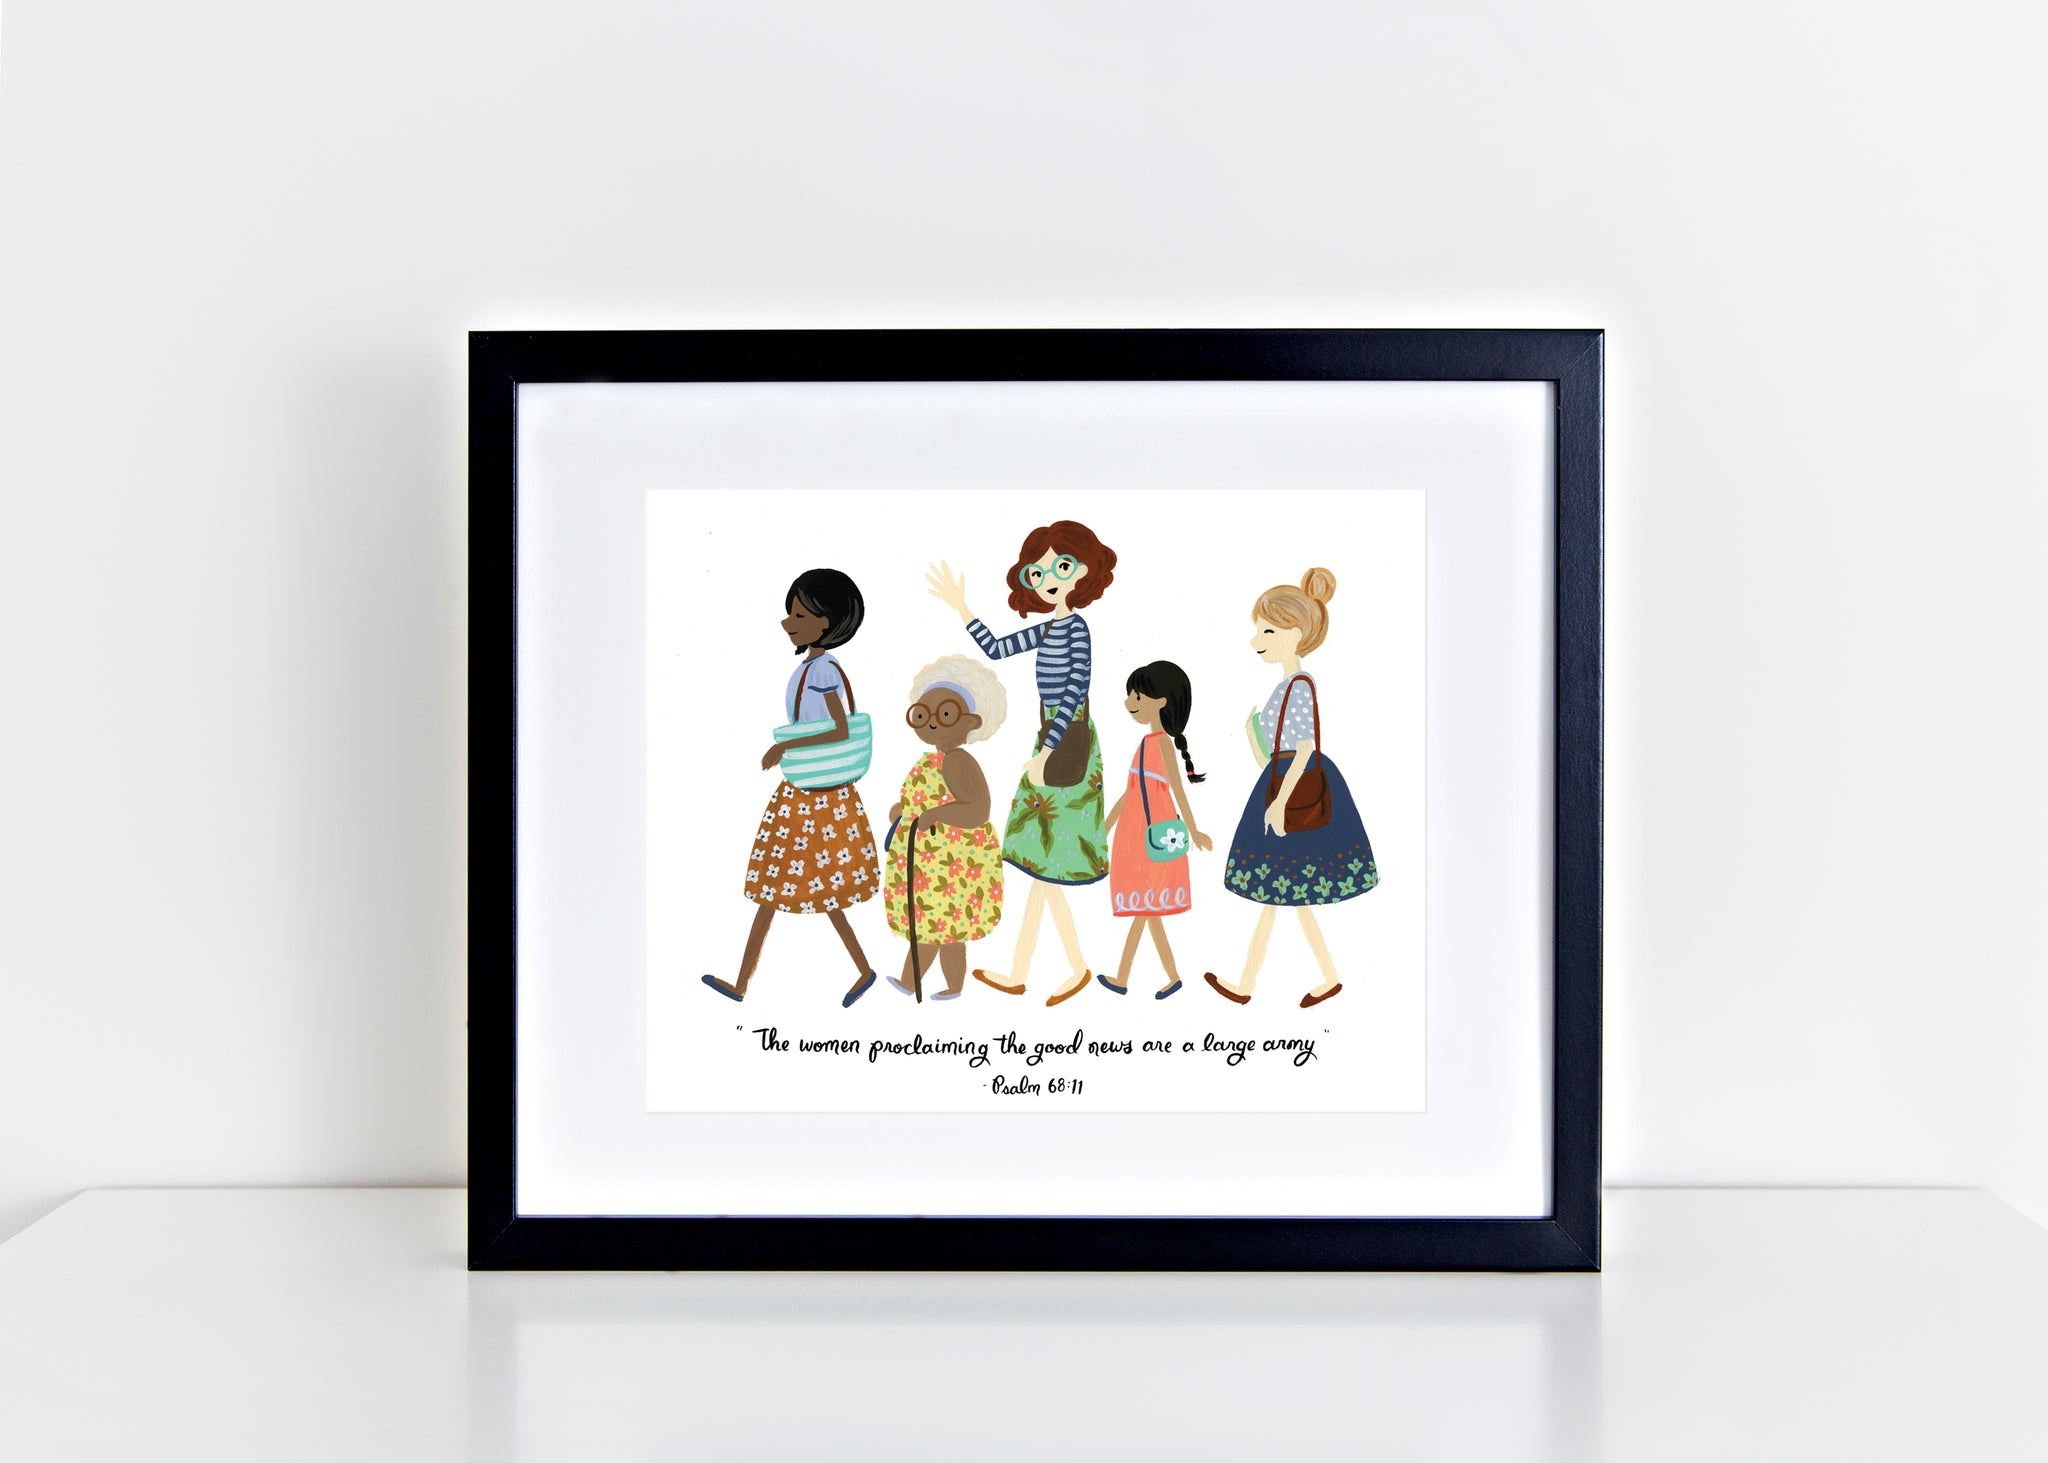 The Women Proclaiming The Good News Are A Large Army - Psalm 68:11 Illustrated 8x10 Print